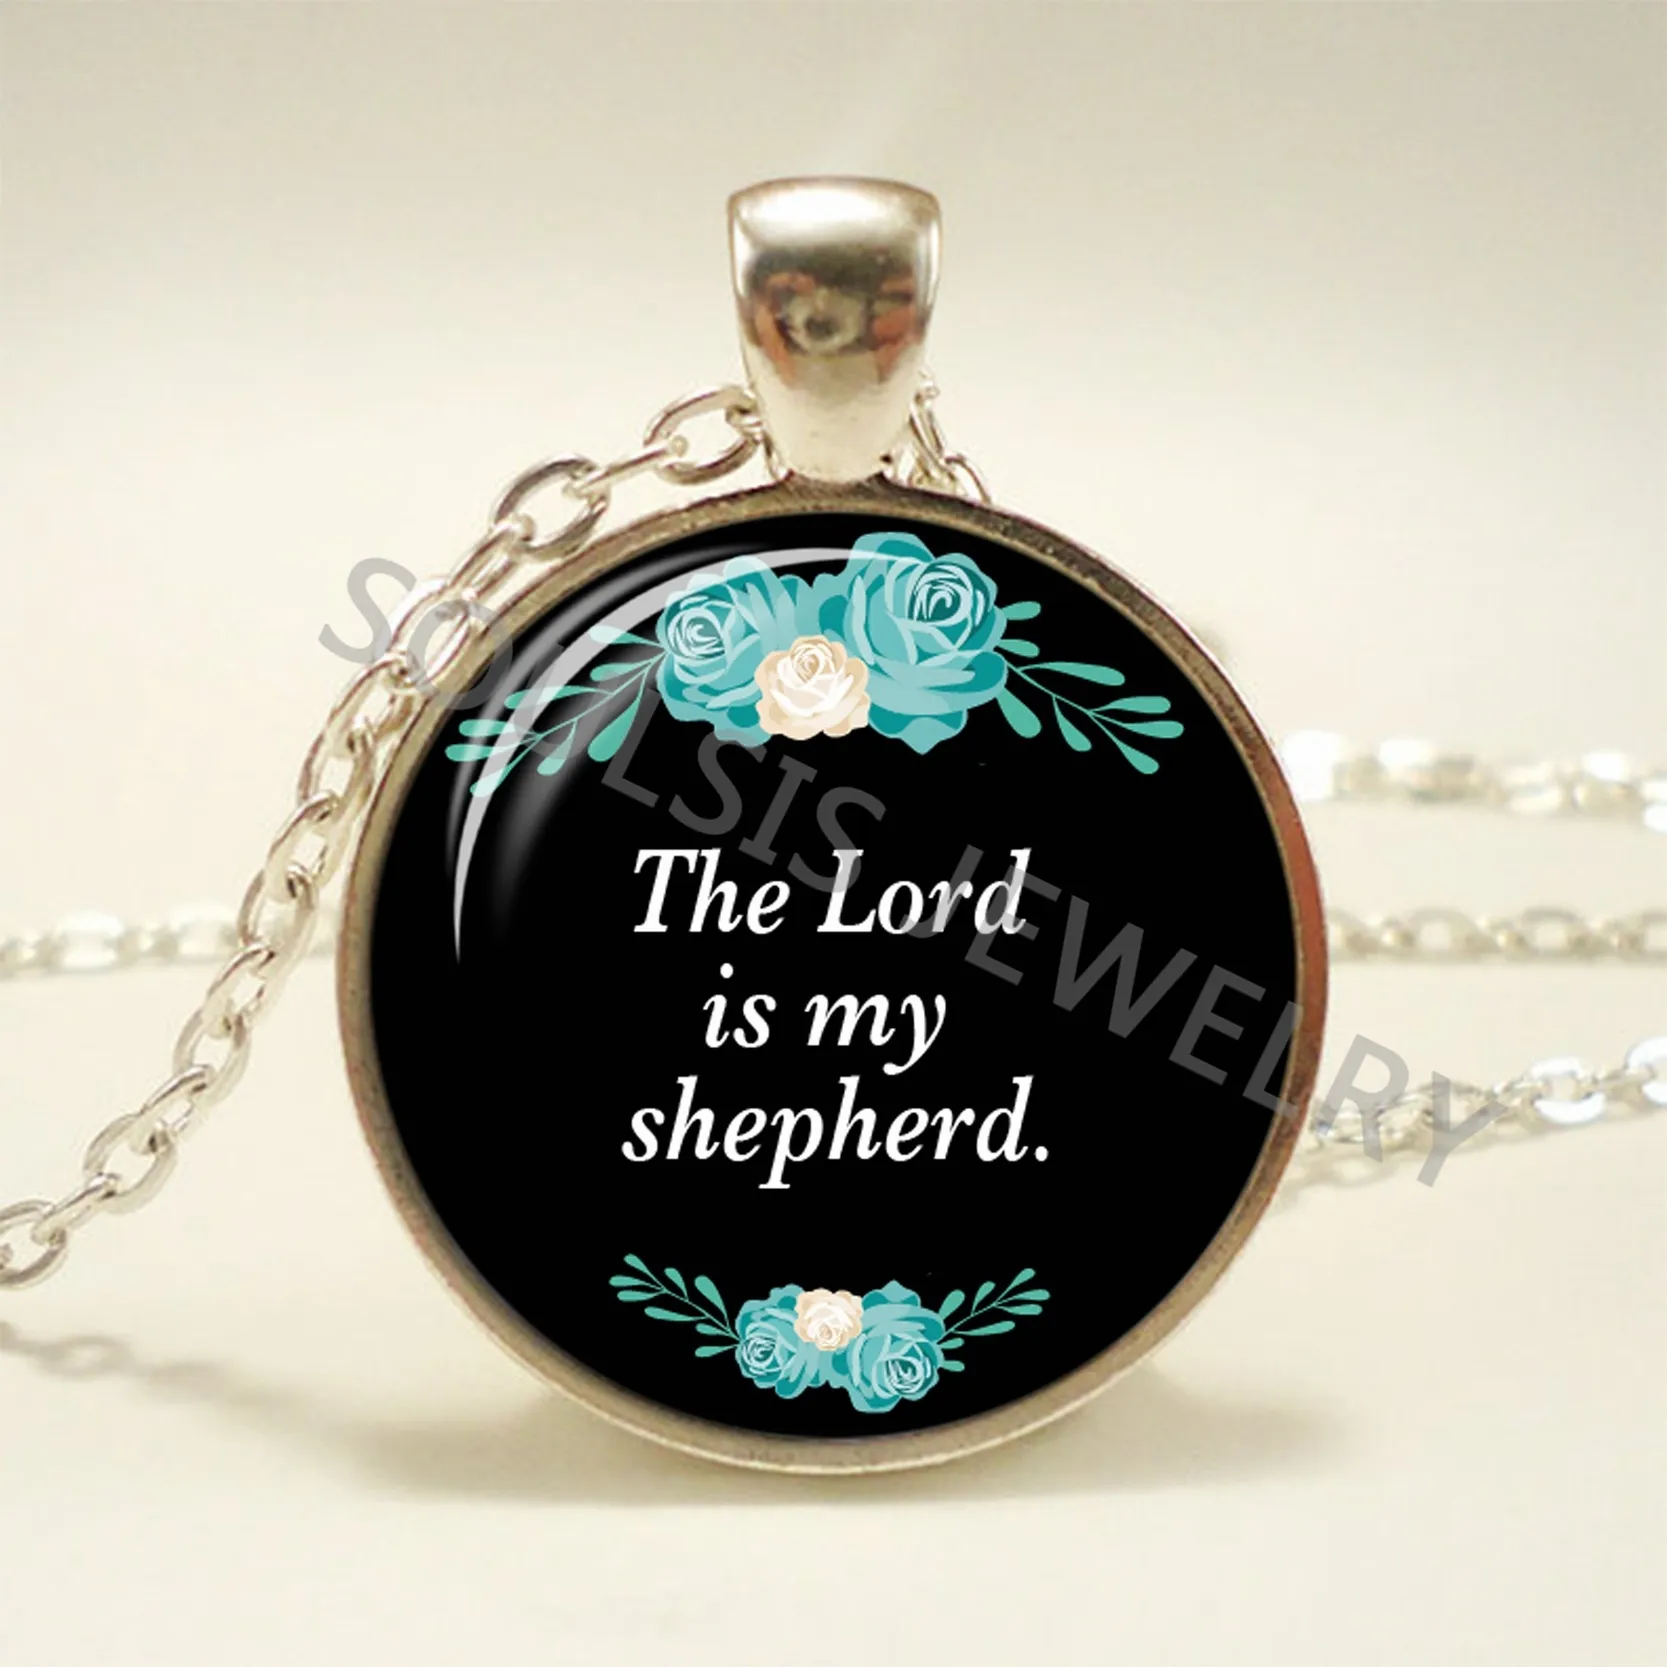 Bible Verses Glass Dome Pendant Necklace God Scripture Quote Jewelry Christian Christmas Jewelry Mother Sister Anniversary Gifts6841693